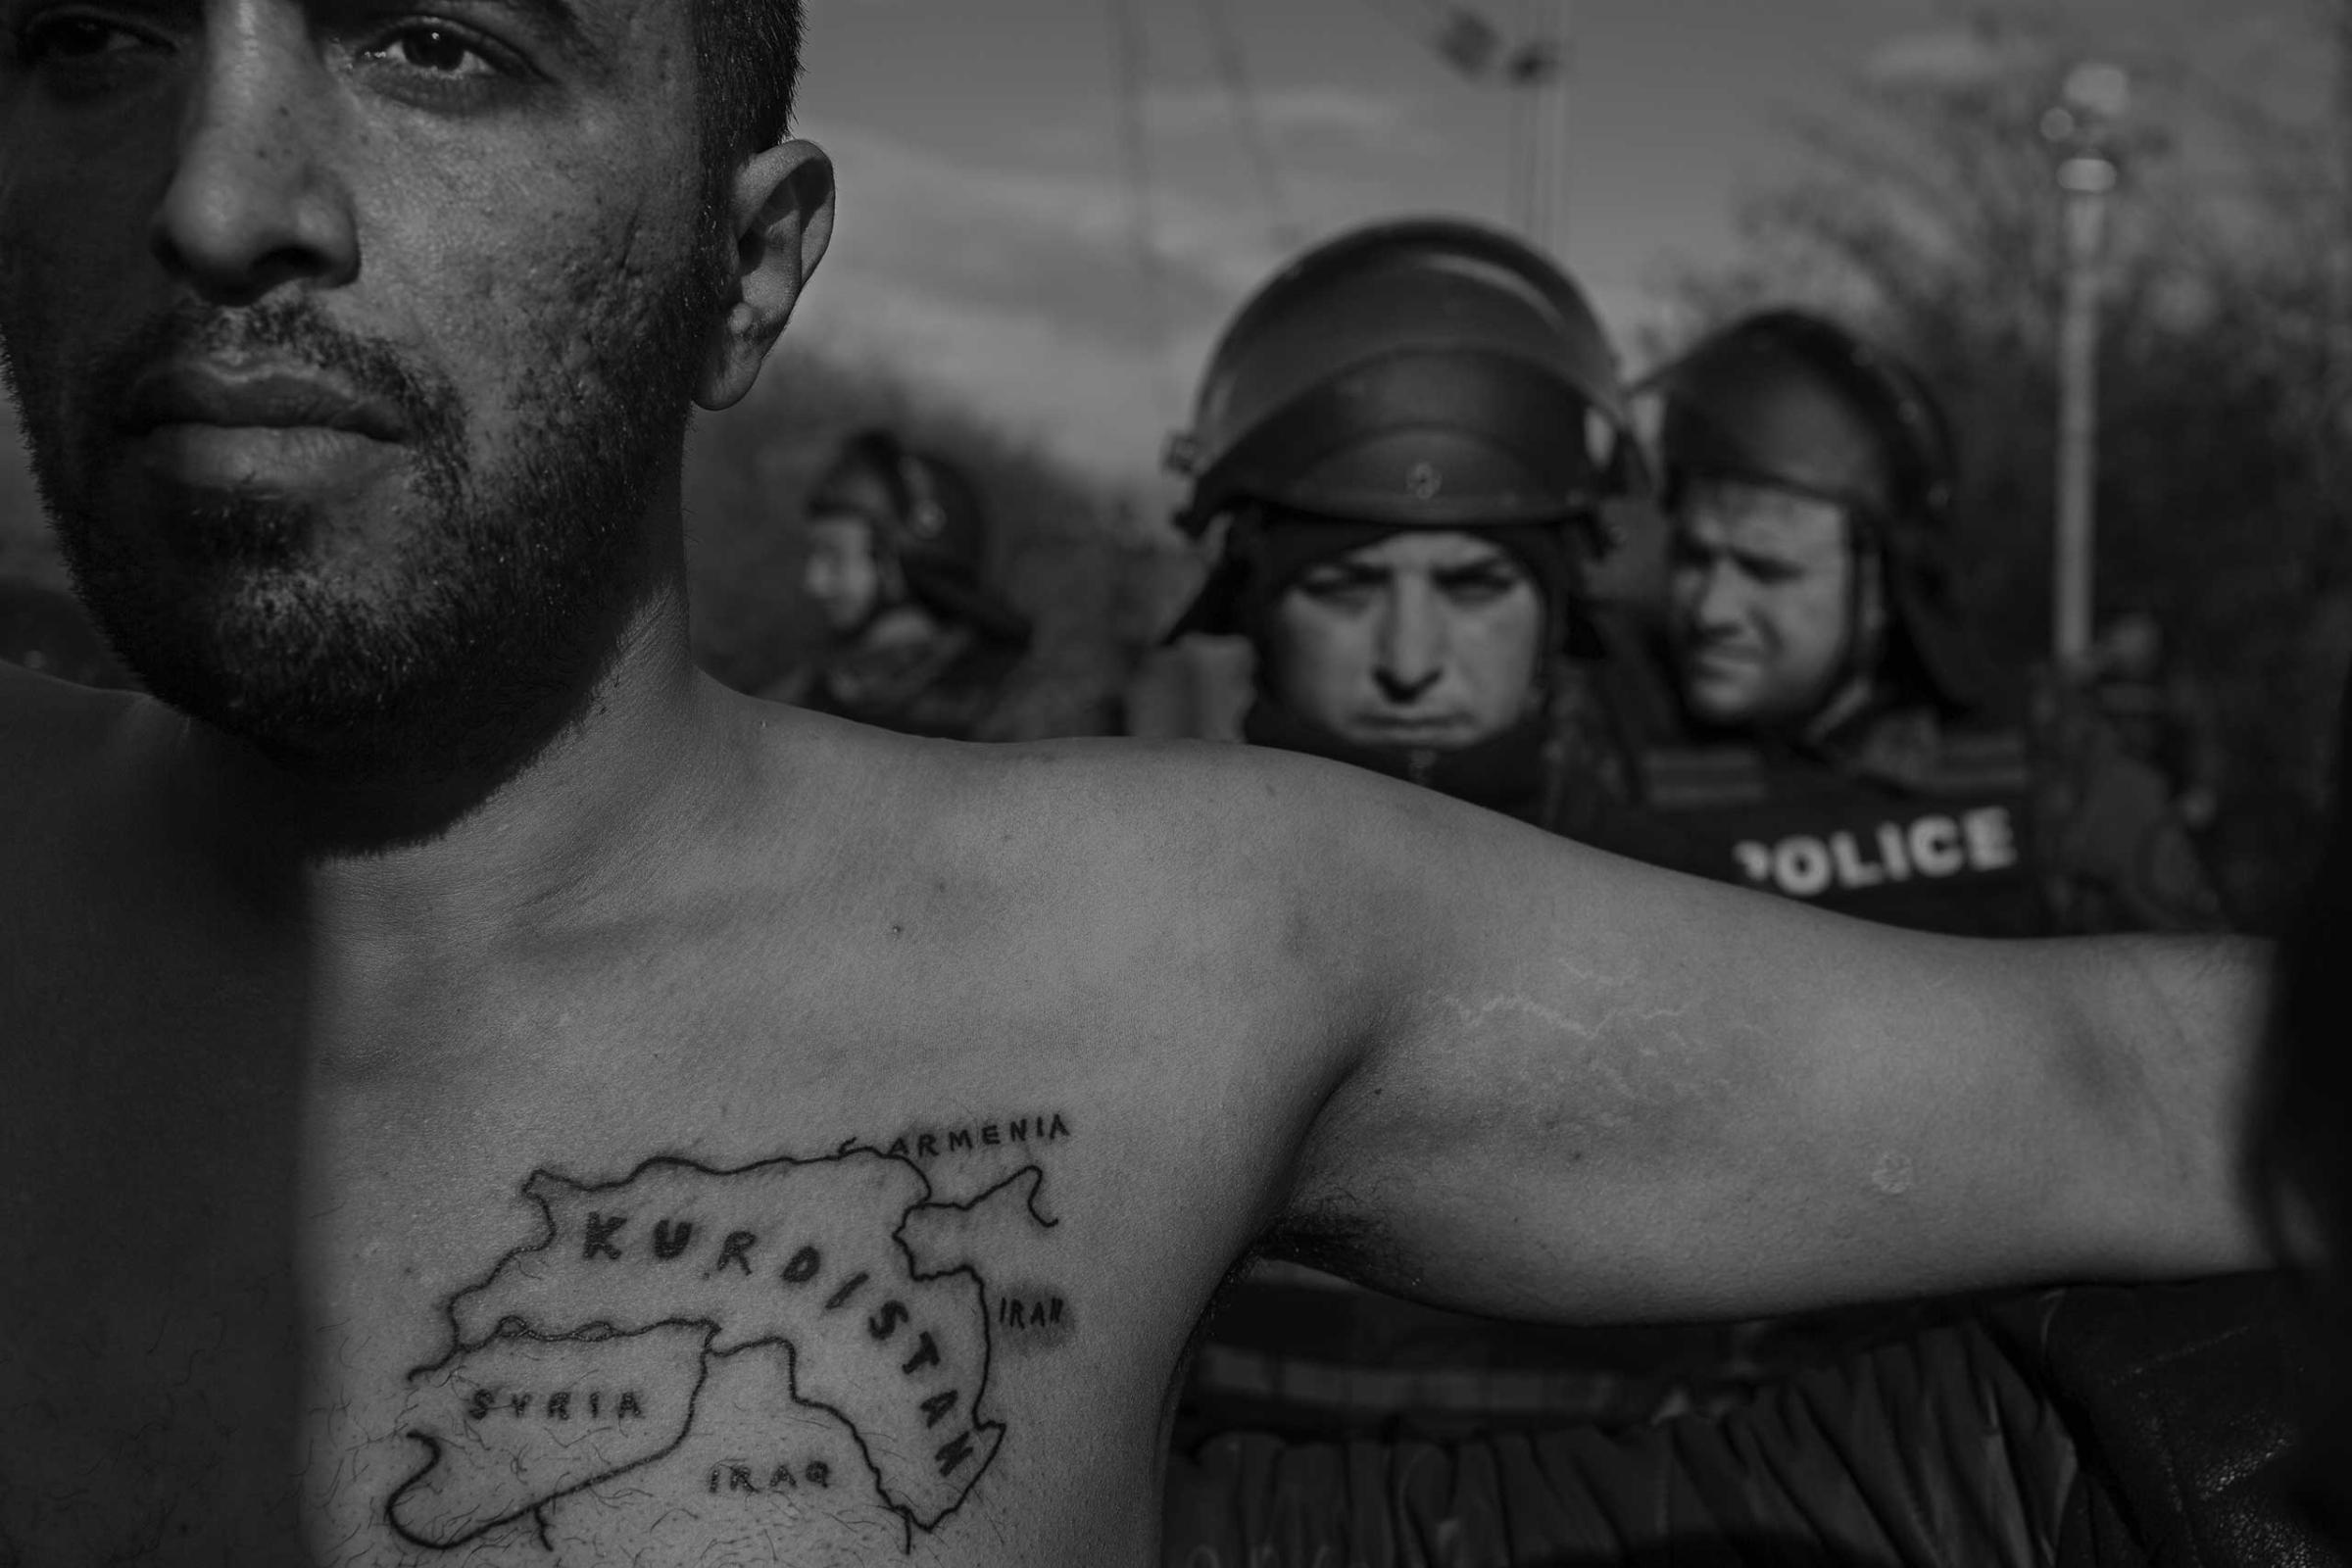 A man spreads his arms in a  bid to defuse tensions between asylum seekers and police at a demonstration at the Macedonian border.